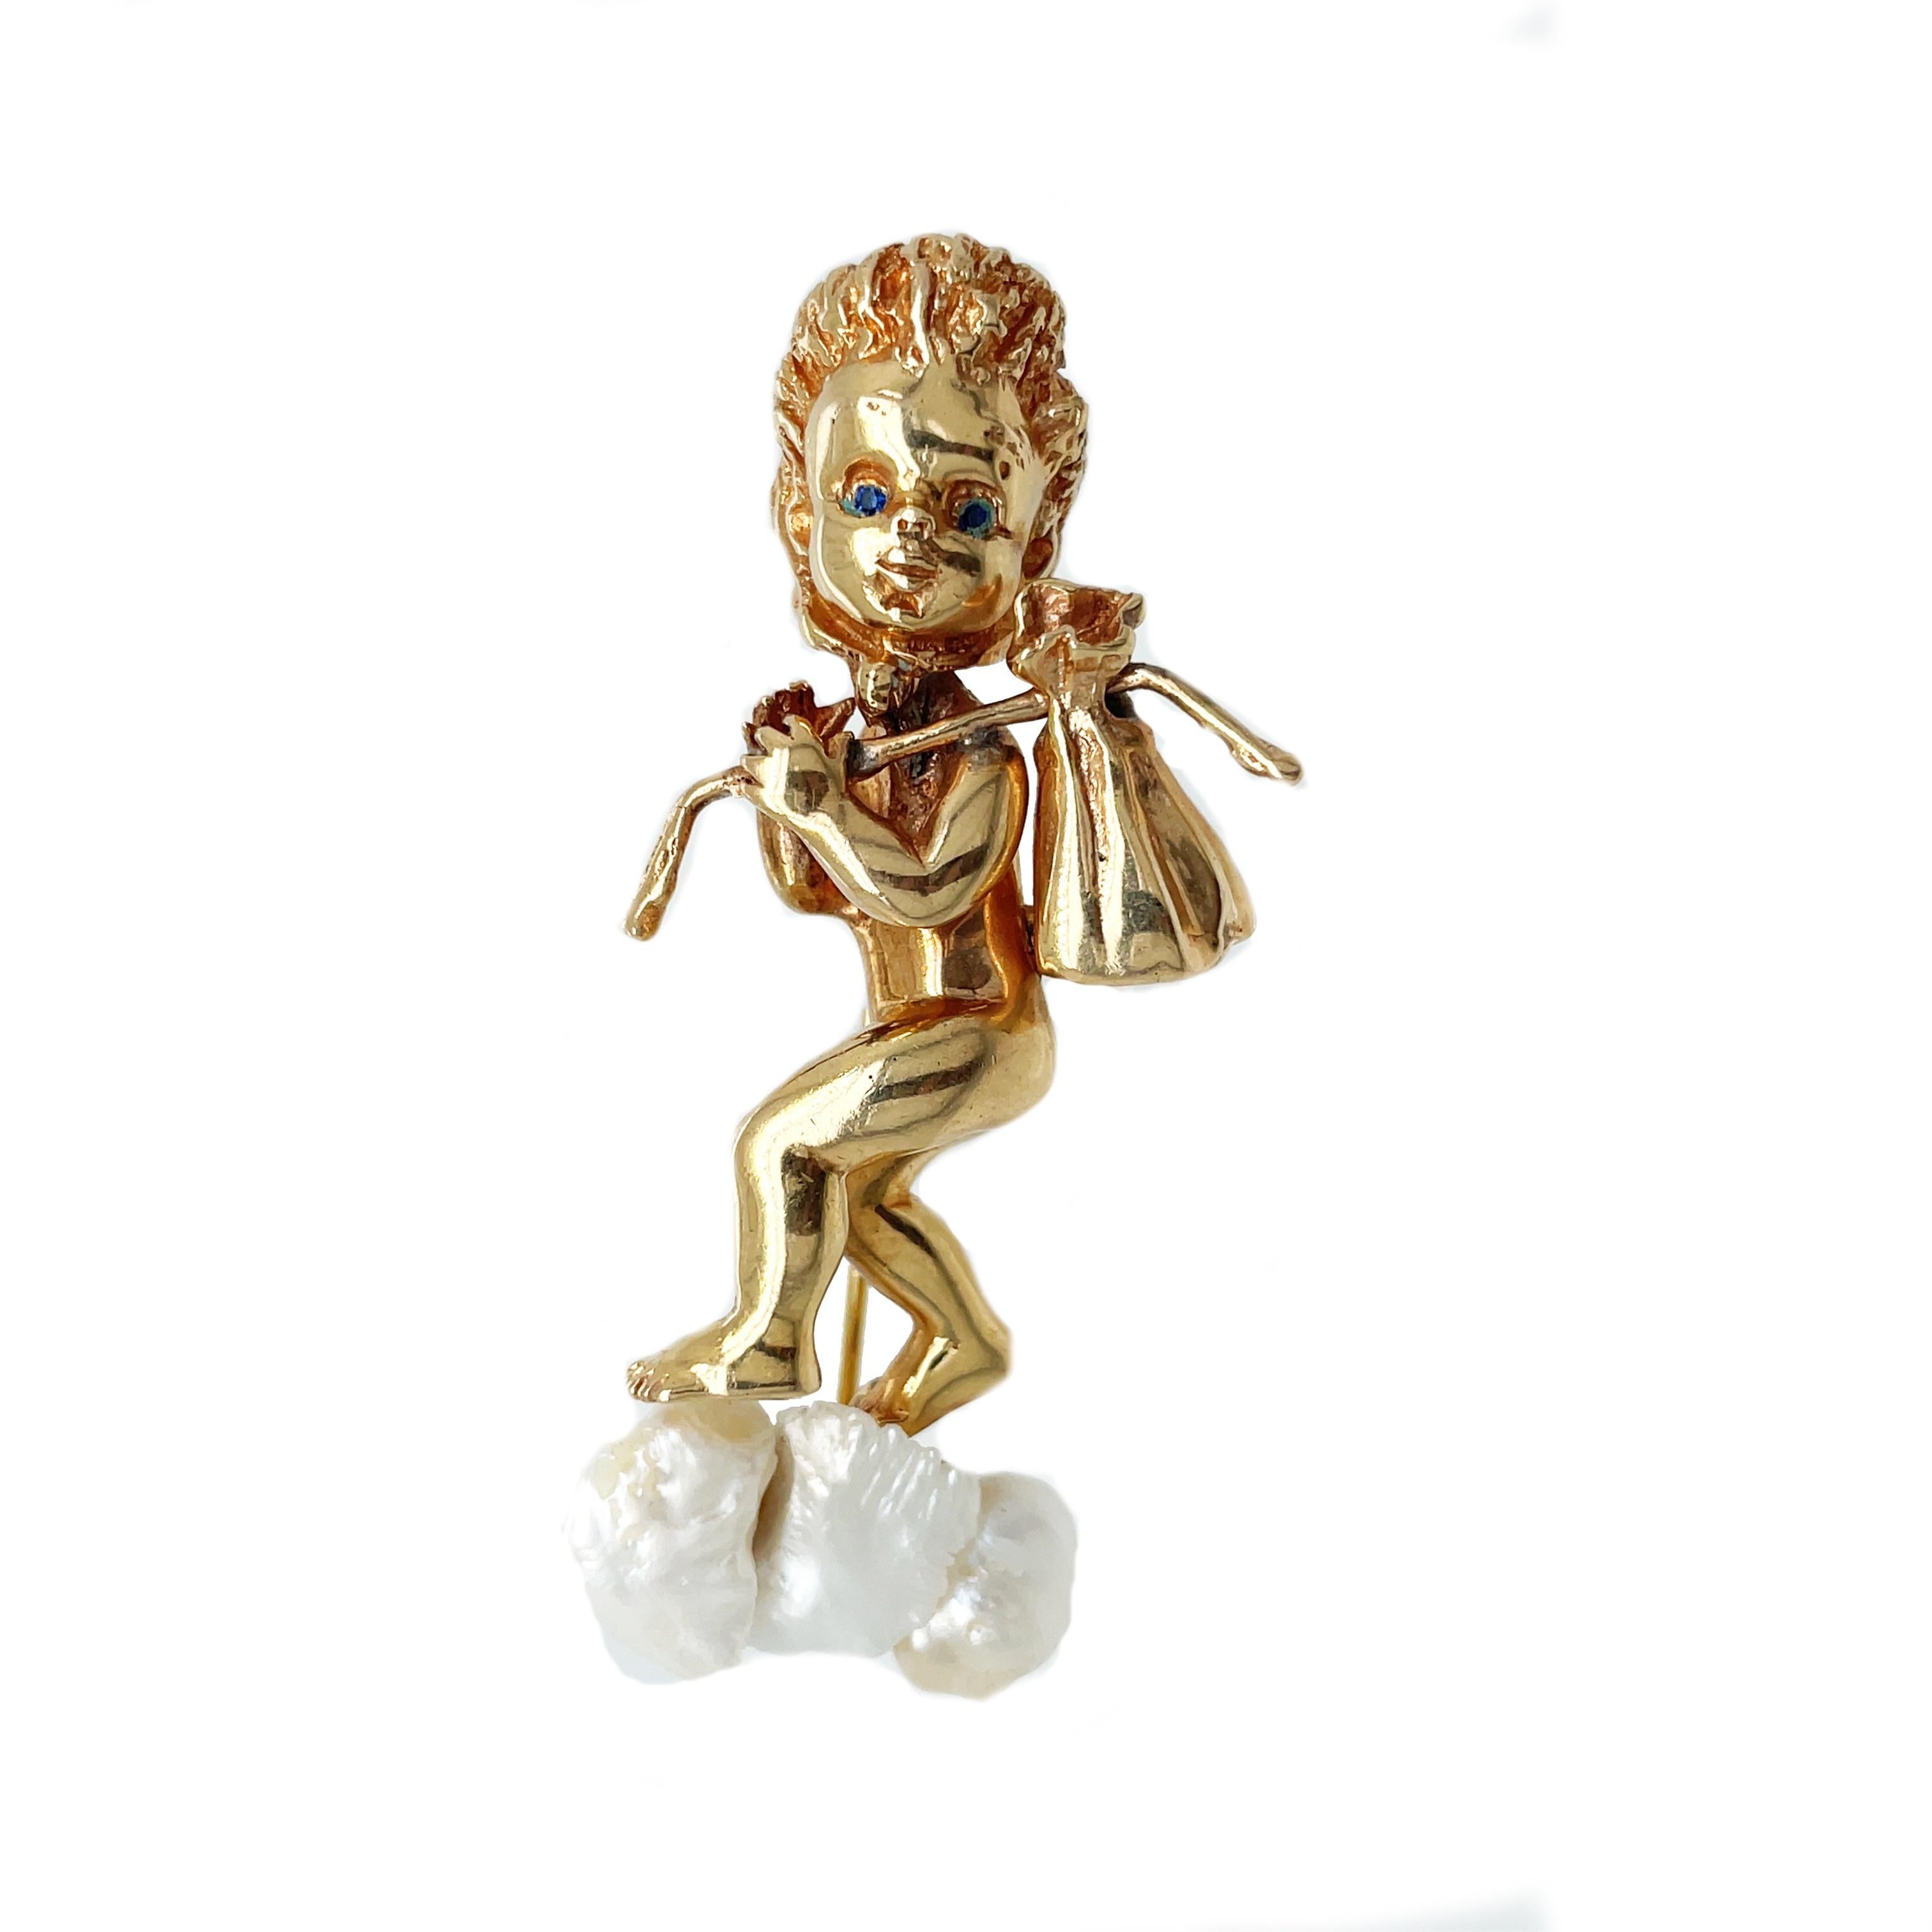 This is an amazing signed Ruser pin set in 14K yellow gold that features three Mississippi Delta Pearls and vivid blue sapphire eyes! This unique, clever, and whimsical piece depicts a cute little blue-eyed child carrying a bag over their shoulder.